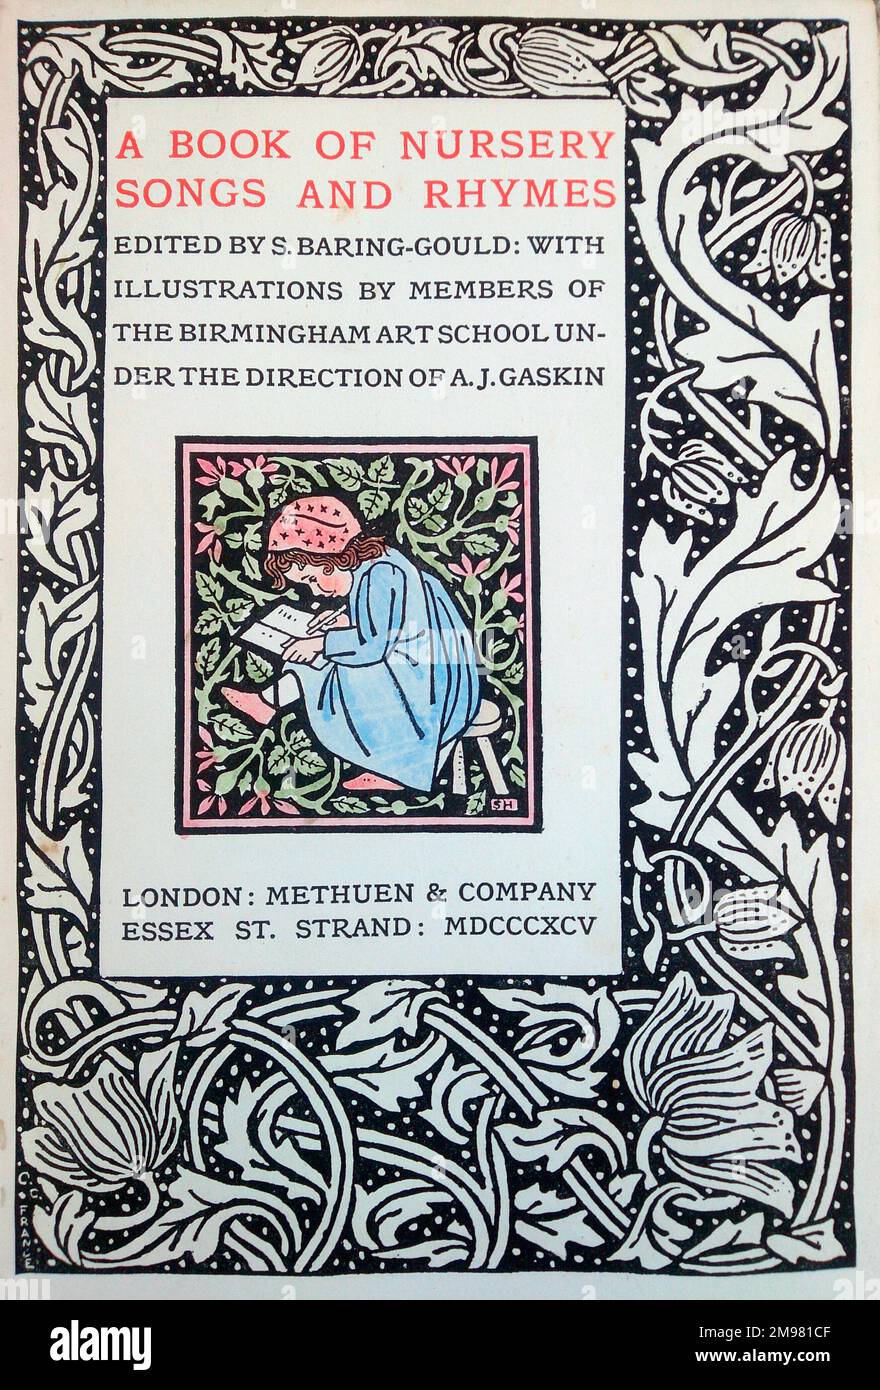 Title page illustration, A Book of Nursery Songs and Rhymes, edited by S Baring-Gould, with illustrations by members of the Birmingham Art School under the direction of A J Gaskin.  Showing a little girl sitting on a stool, writing in a notebook. Stock Photo